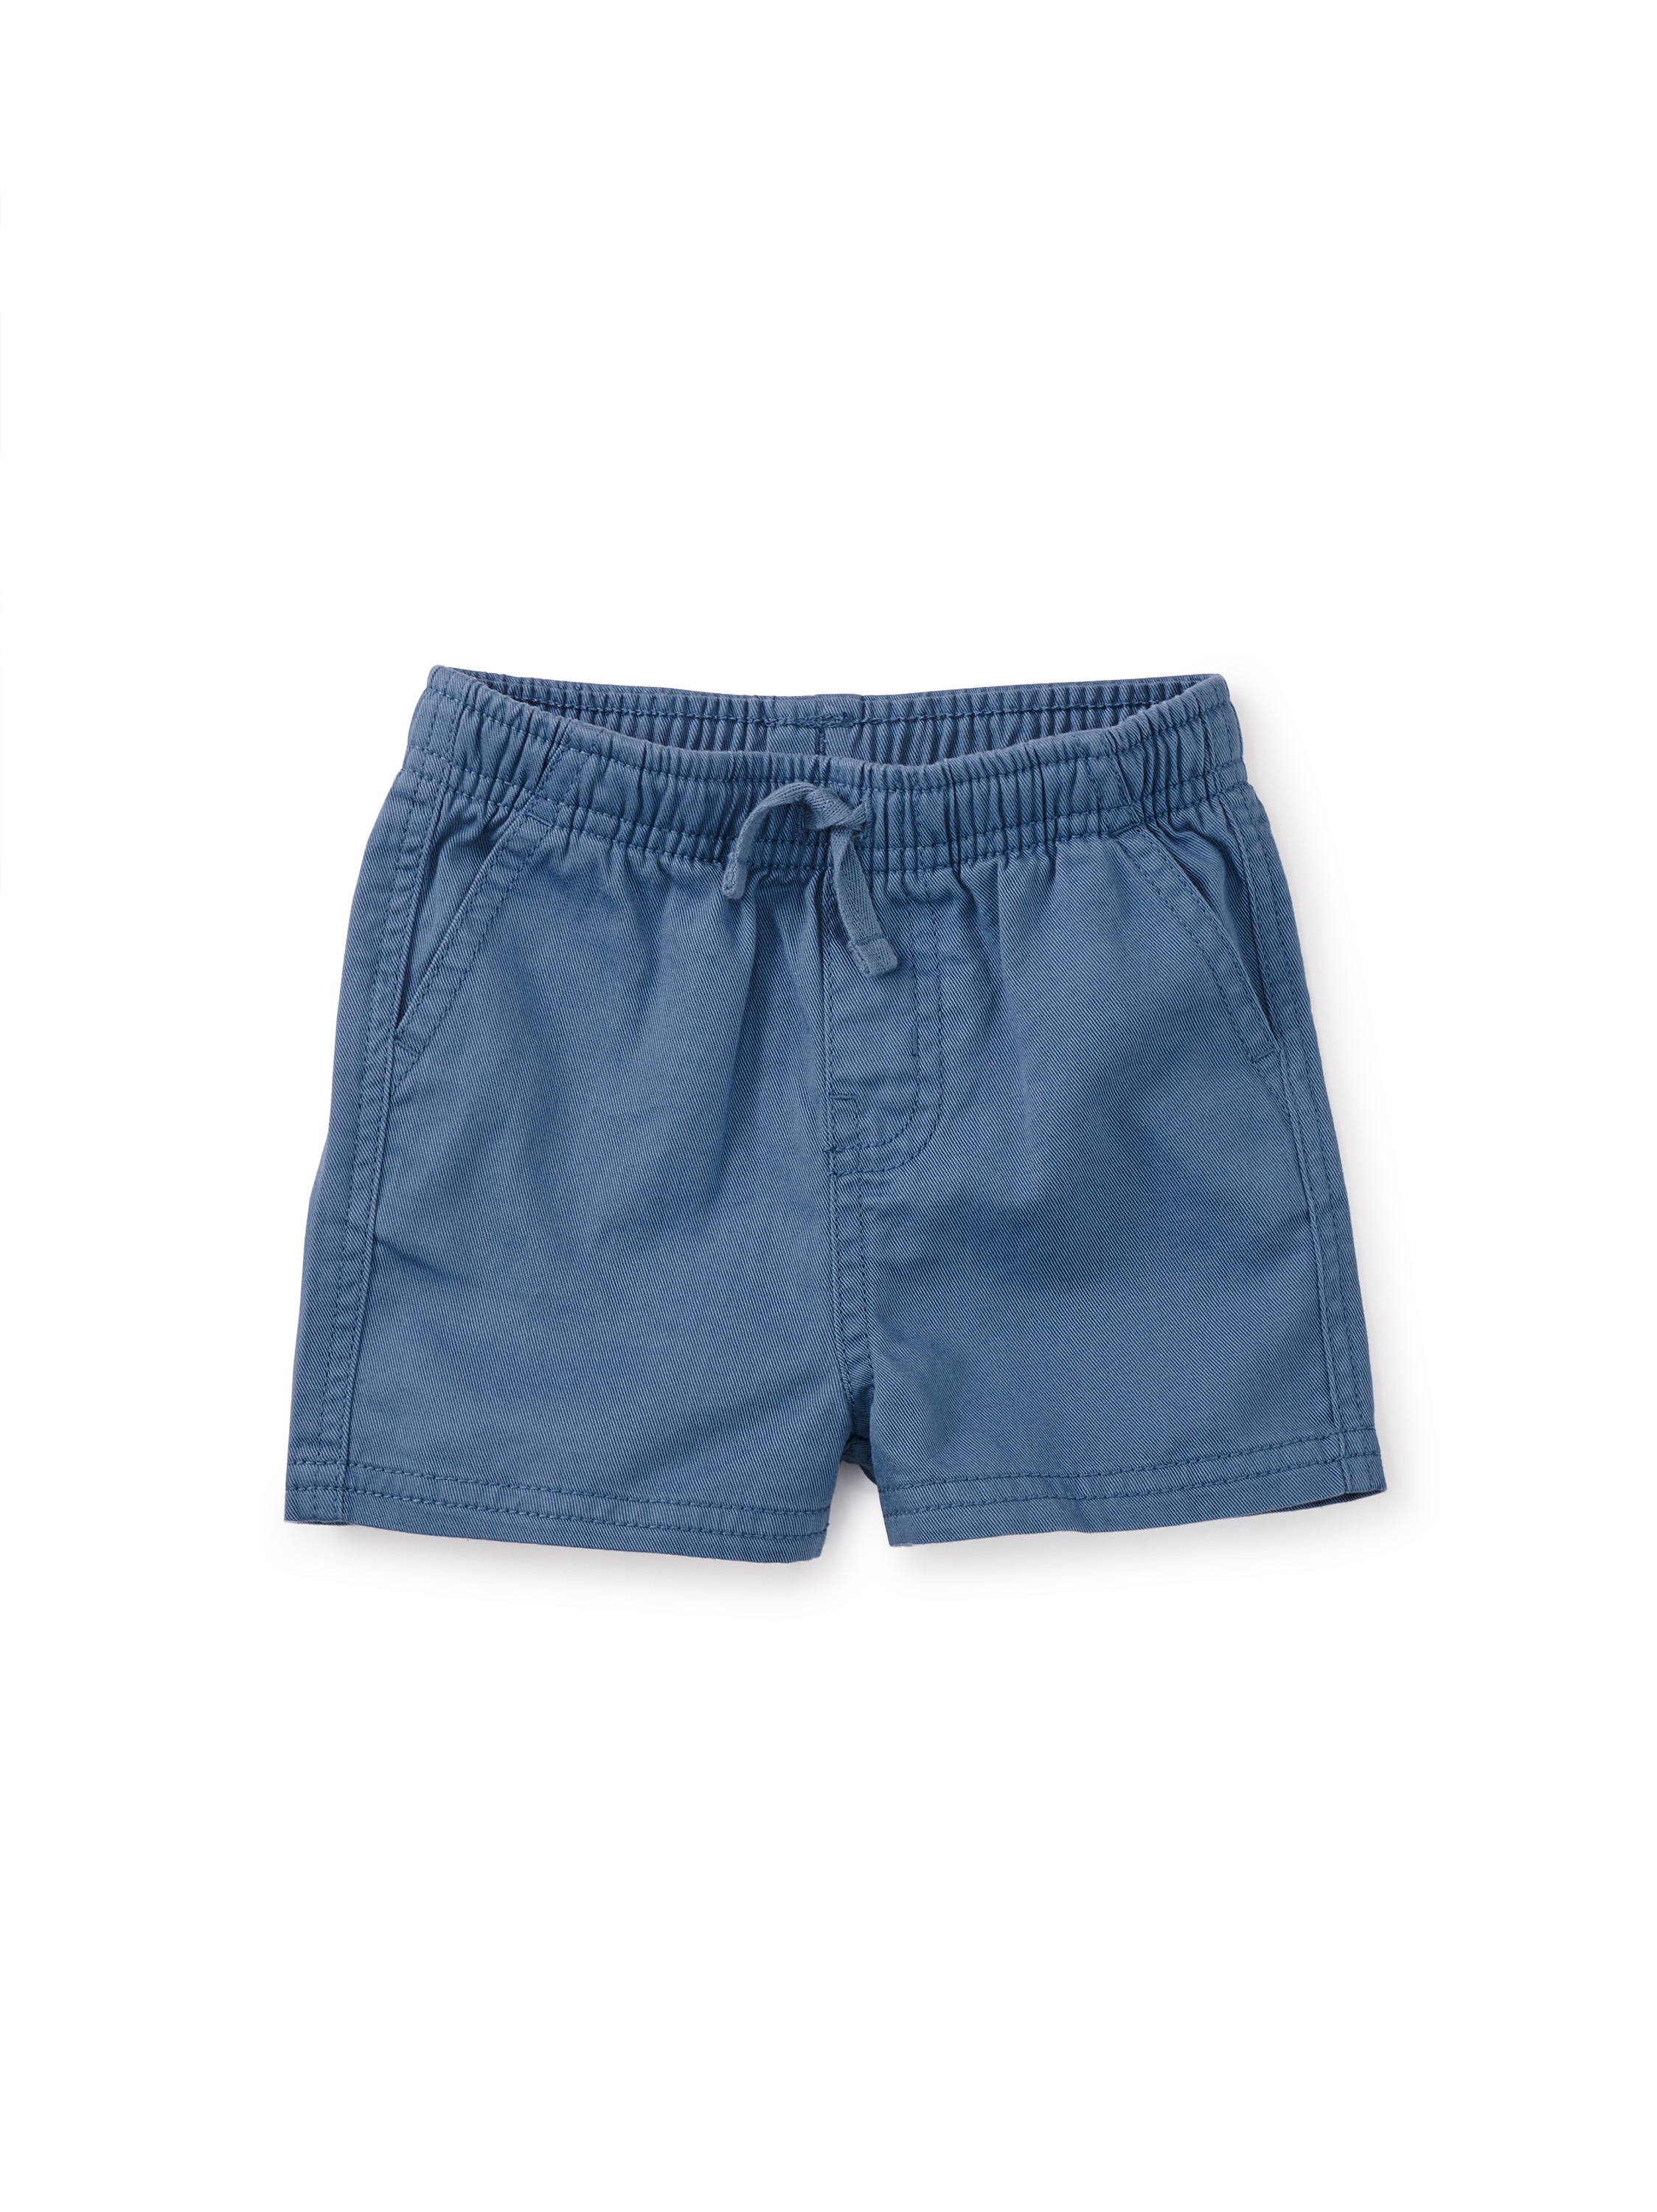 Baby Twill Sport Shorts | Tea Collection